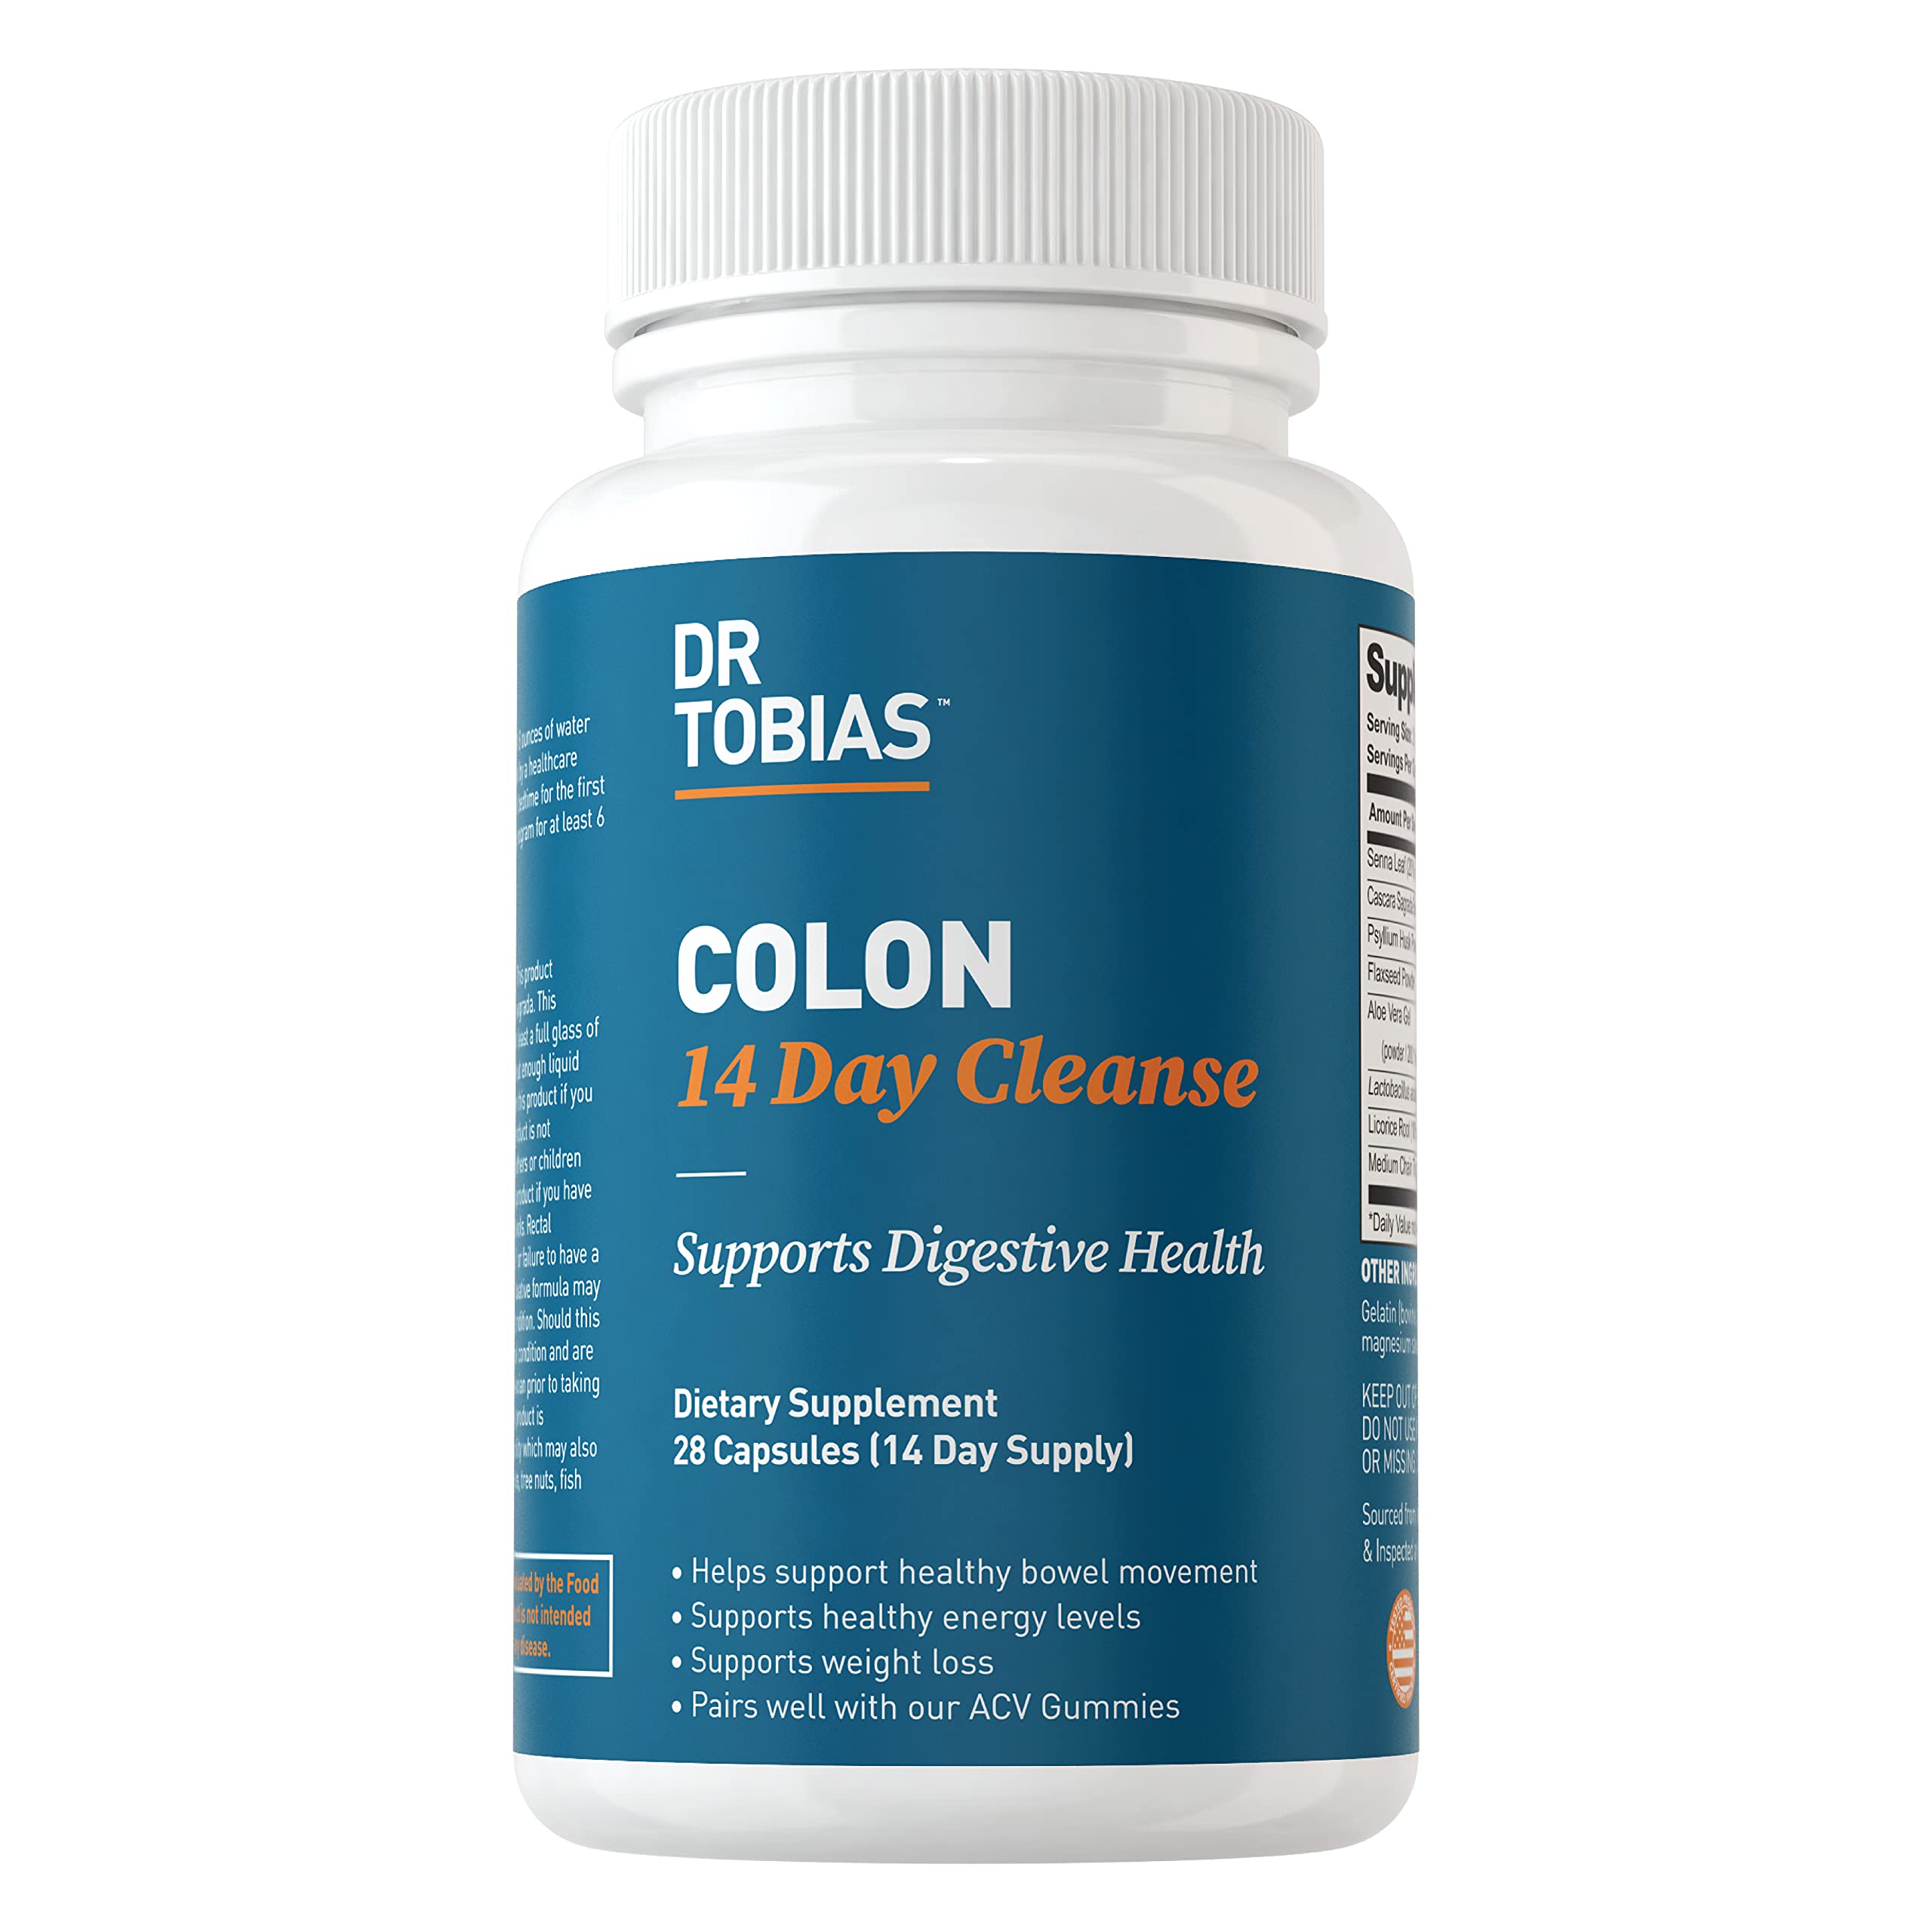 Dr. Tobias Colon Supplement Supports Digestive Health